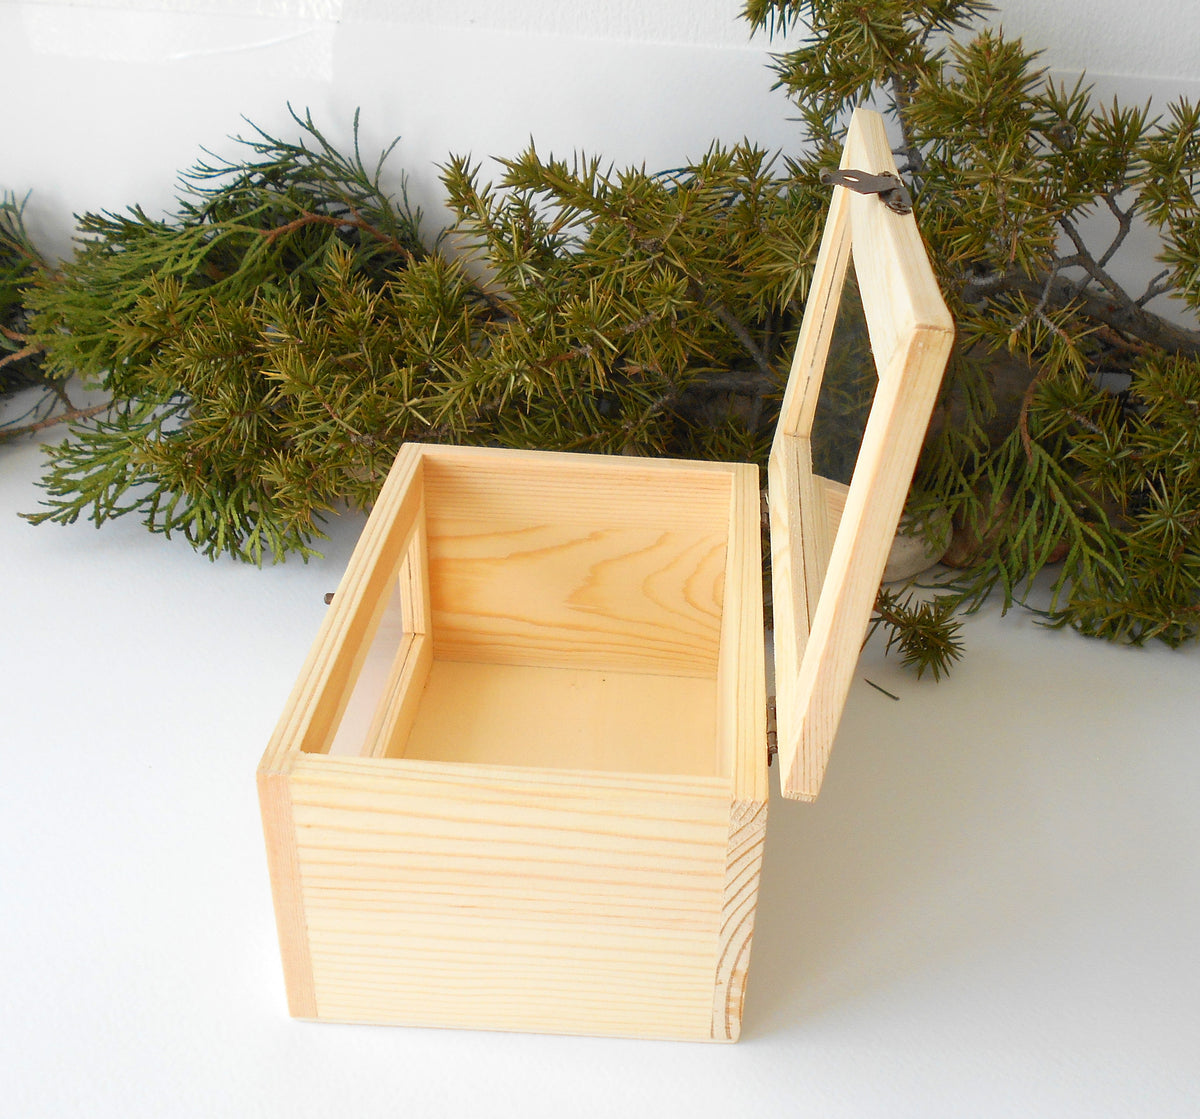 This small wooden display box is made of pinewood and has metal hinges with bronze color and the cap has a glass display so you can see what it&#39;s inside. There is another window on the front side of the box too. It has thick wooden walls and is quality made with fine pine wood materials.